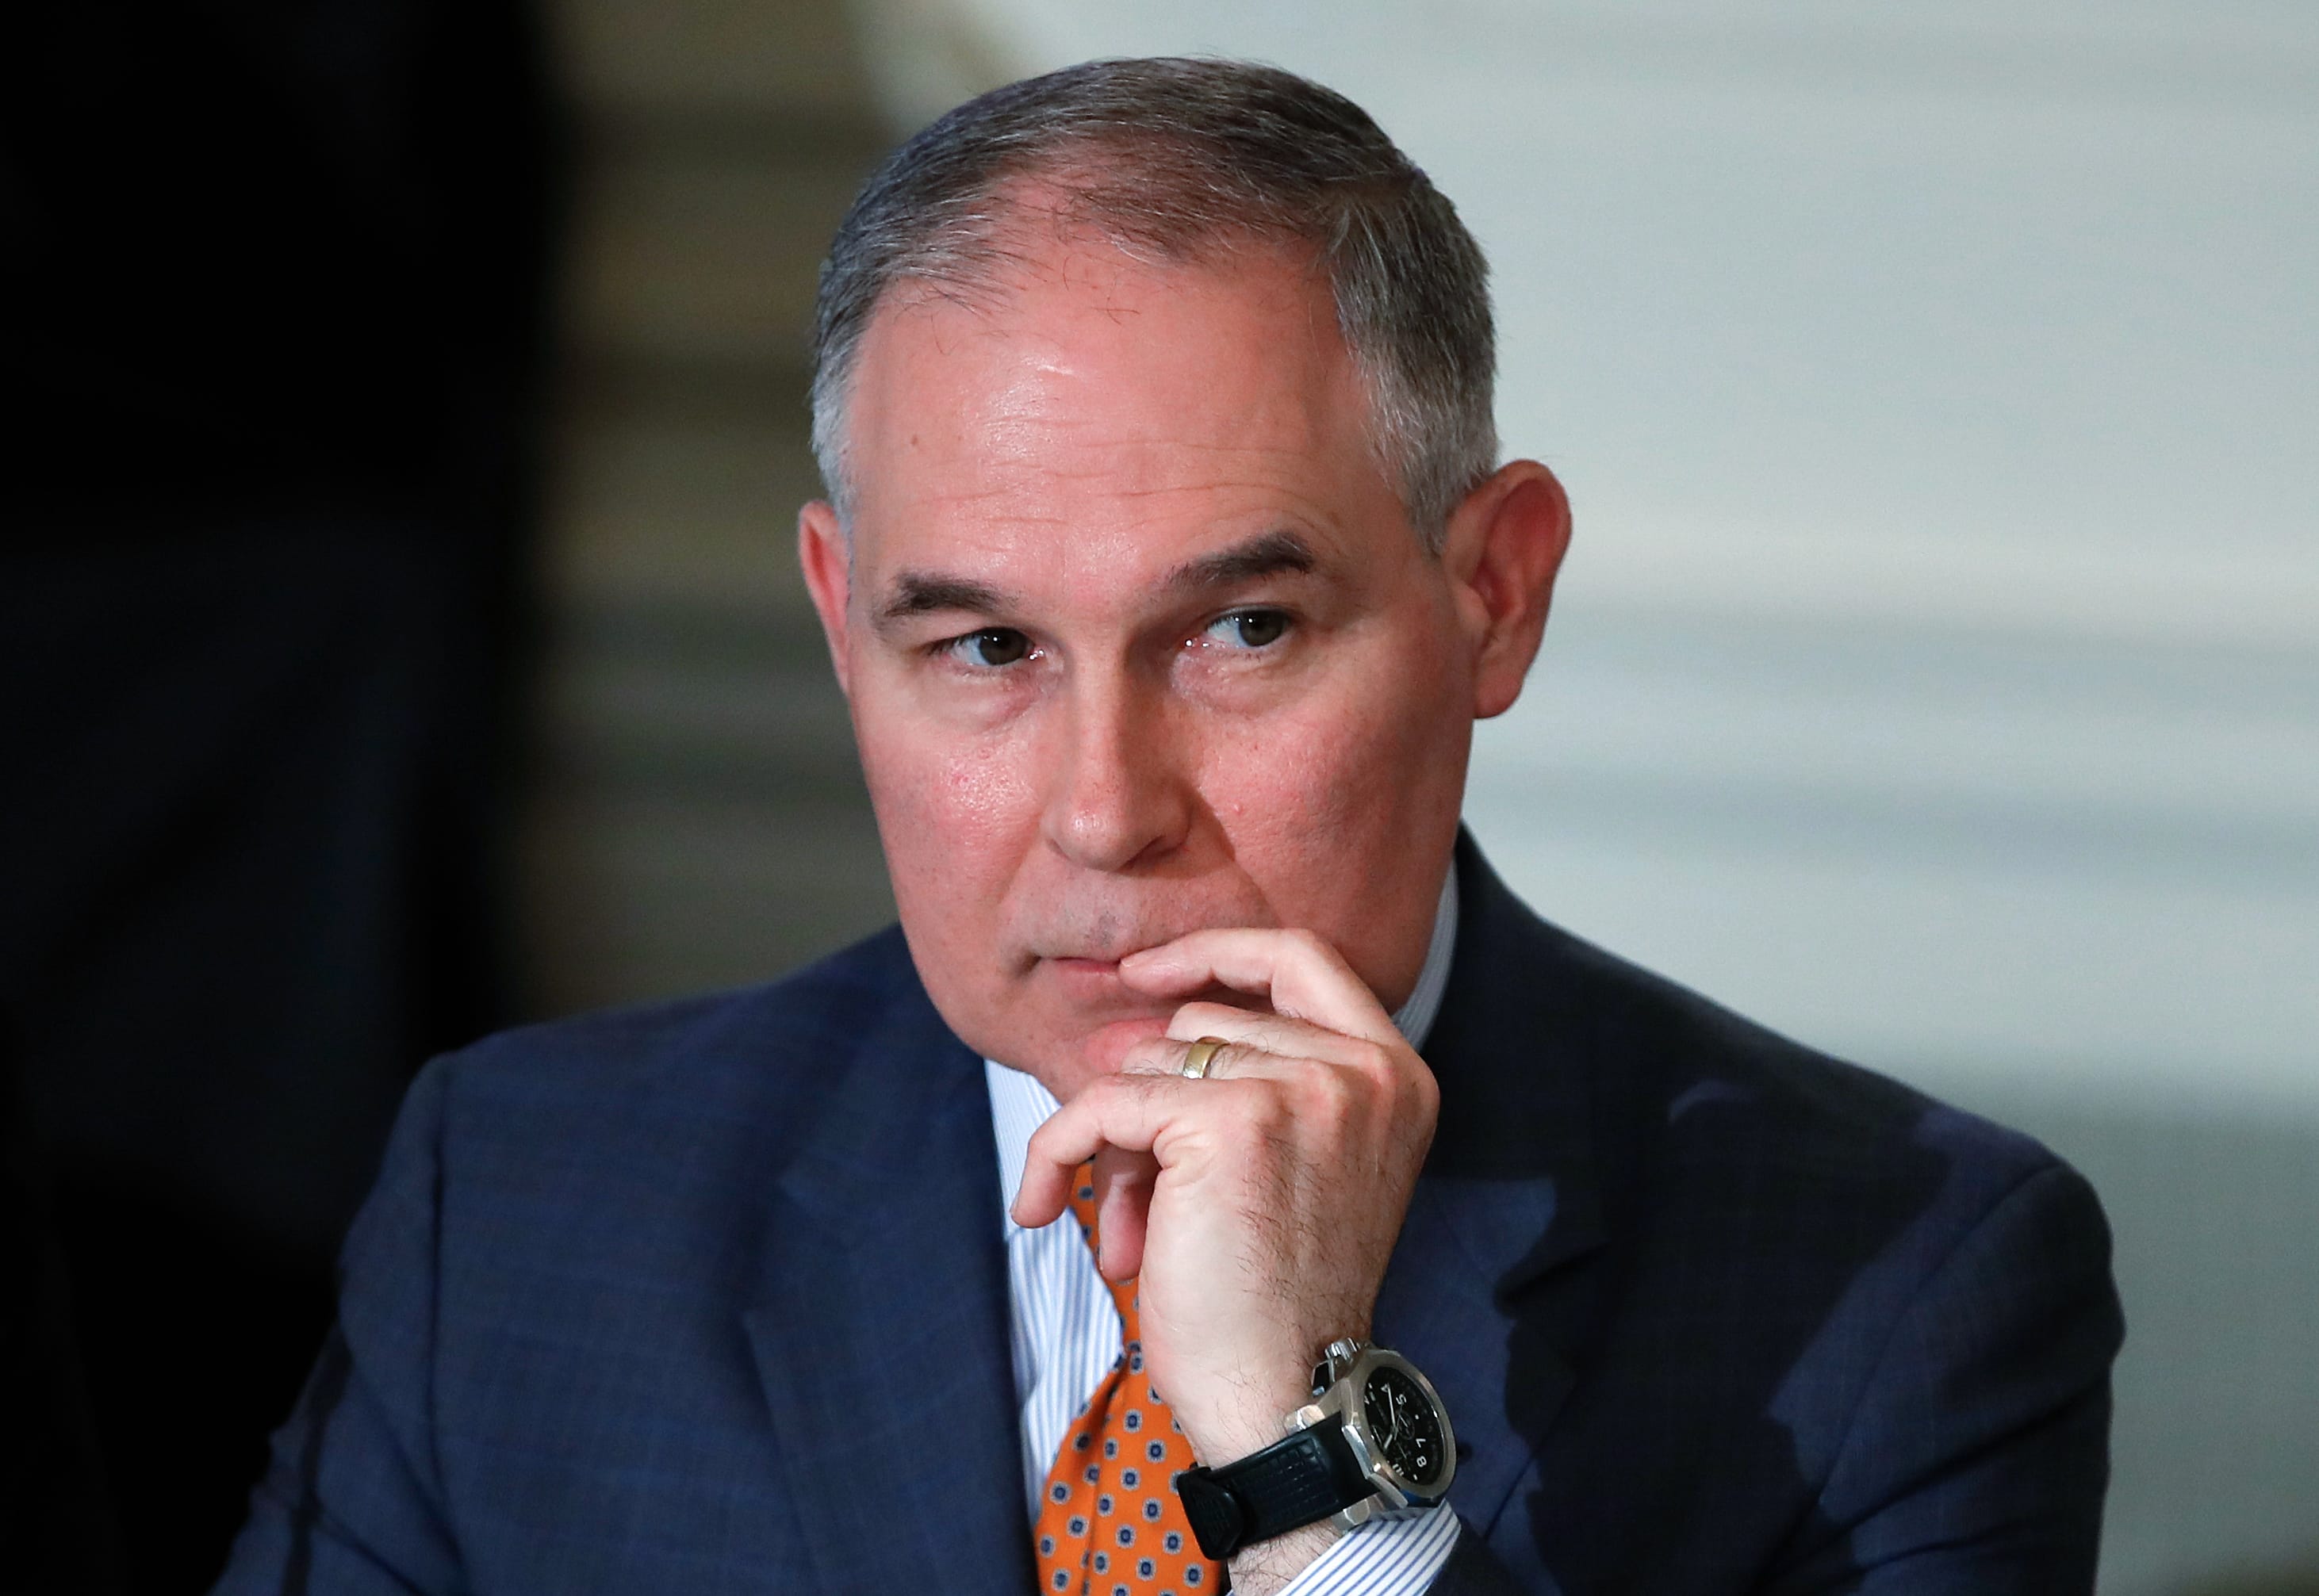 In this Feb. 12, 2018 photo, Environmental Protection Agency Administrator Scott Pruitt attends a meeting at the White House in Washington.   Trump is offering his support to the head of the Environmental Protection Agency who is at the center of swirling ethics questions.